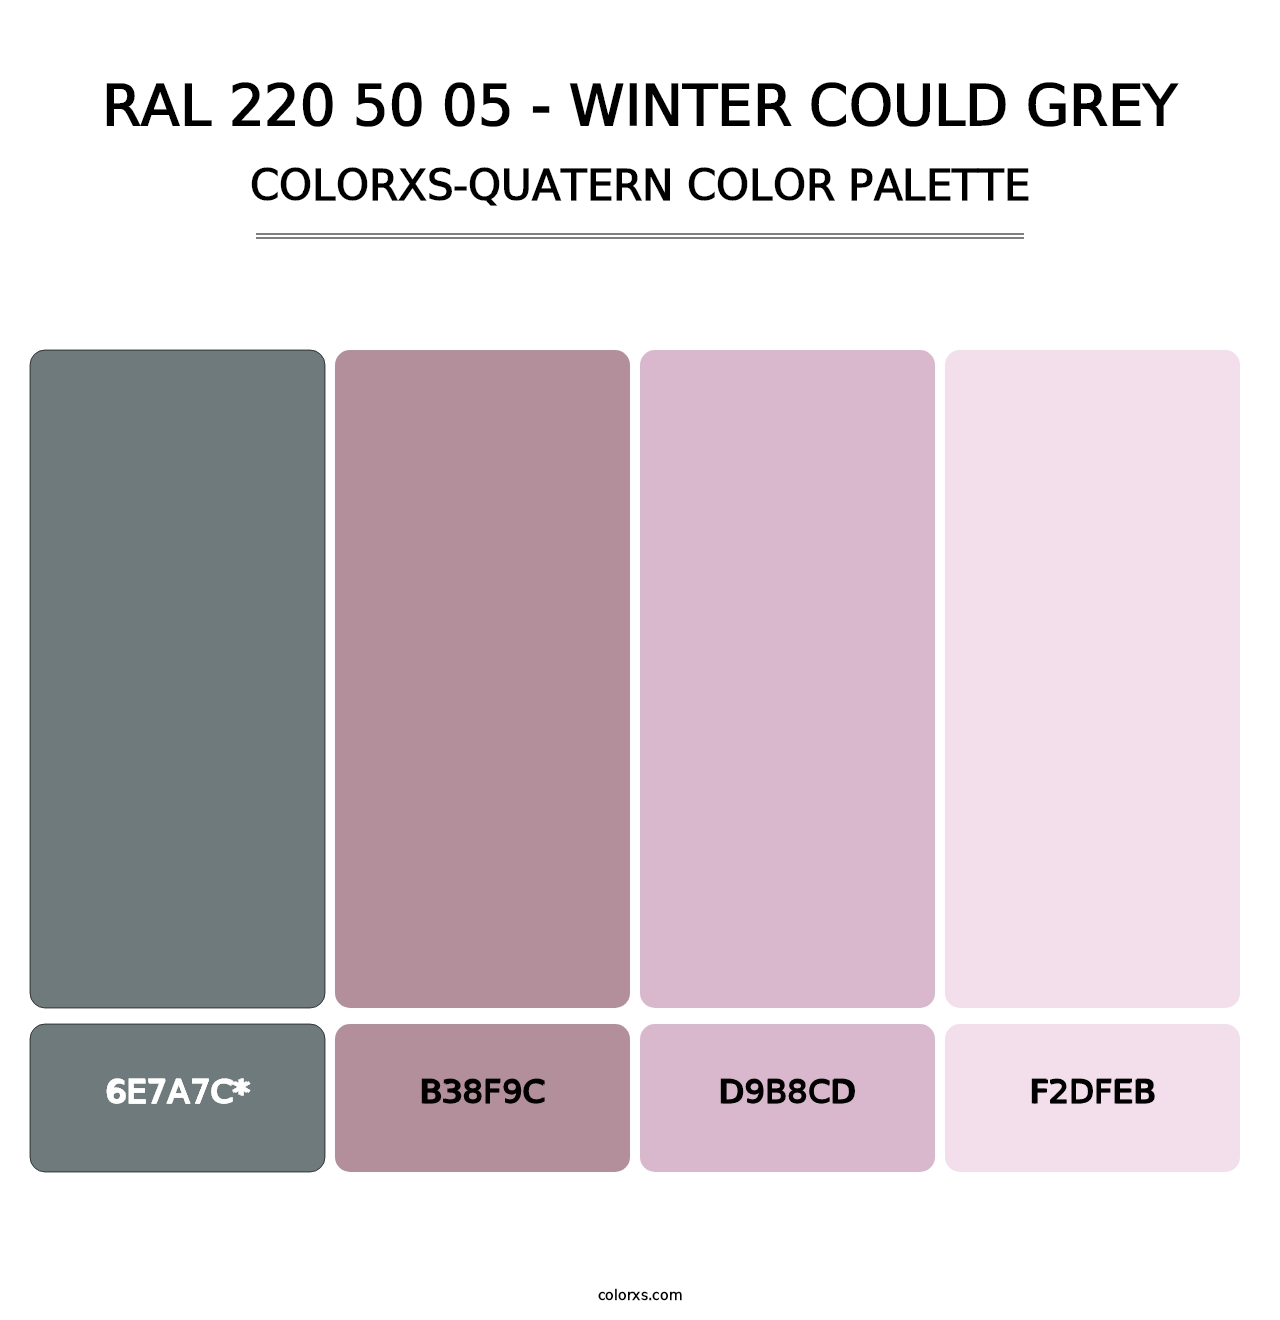 RAL 220 50 05 - Winter Could Grey - Colorxs Quatern Palette